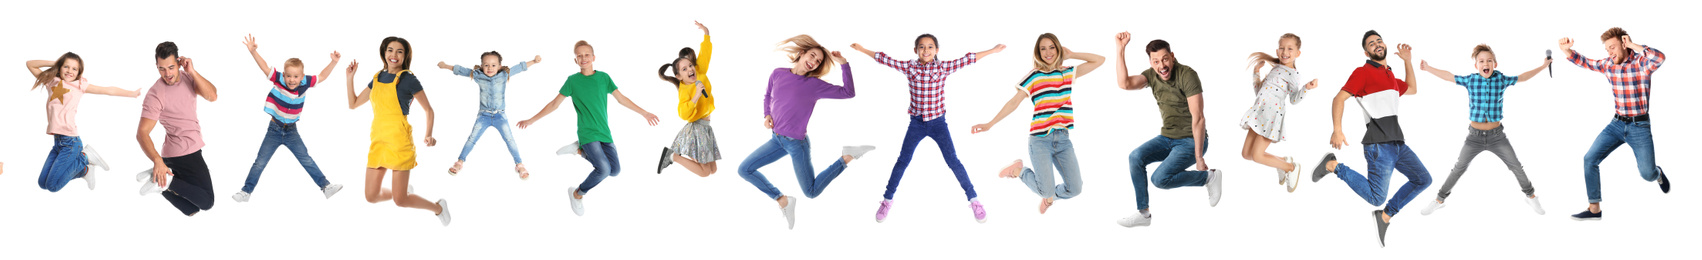 Image of Collage of emotional people jumping on white background. Banner design